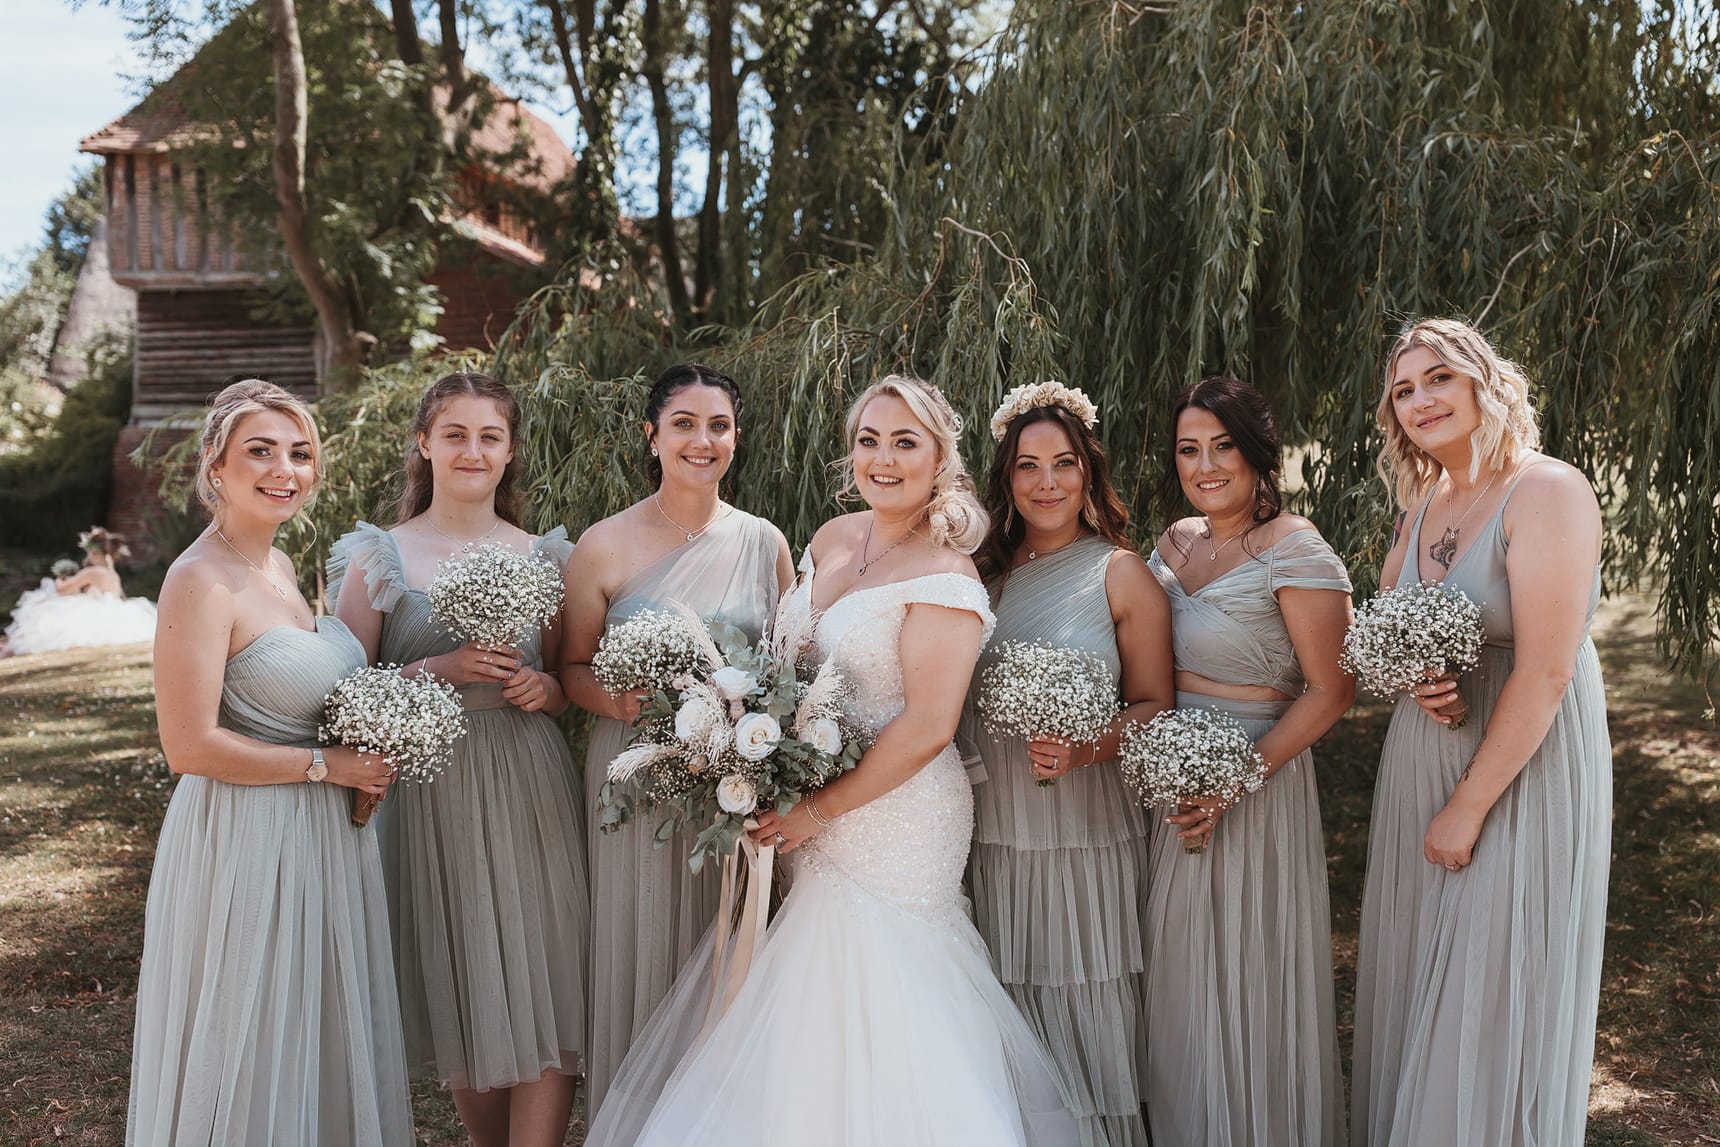 Bridal party photograph in front of a willow tree